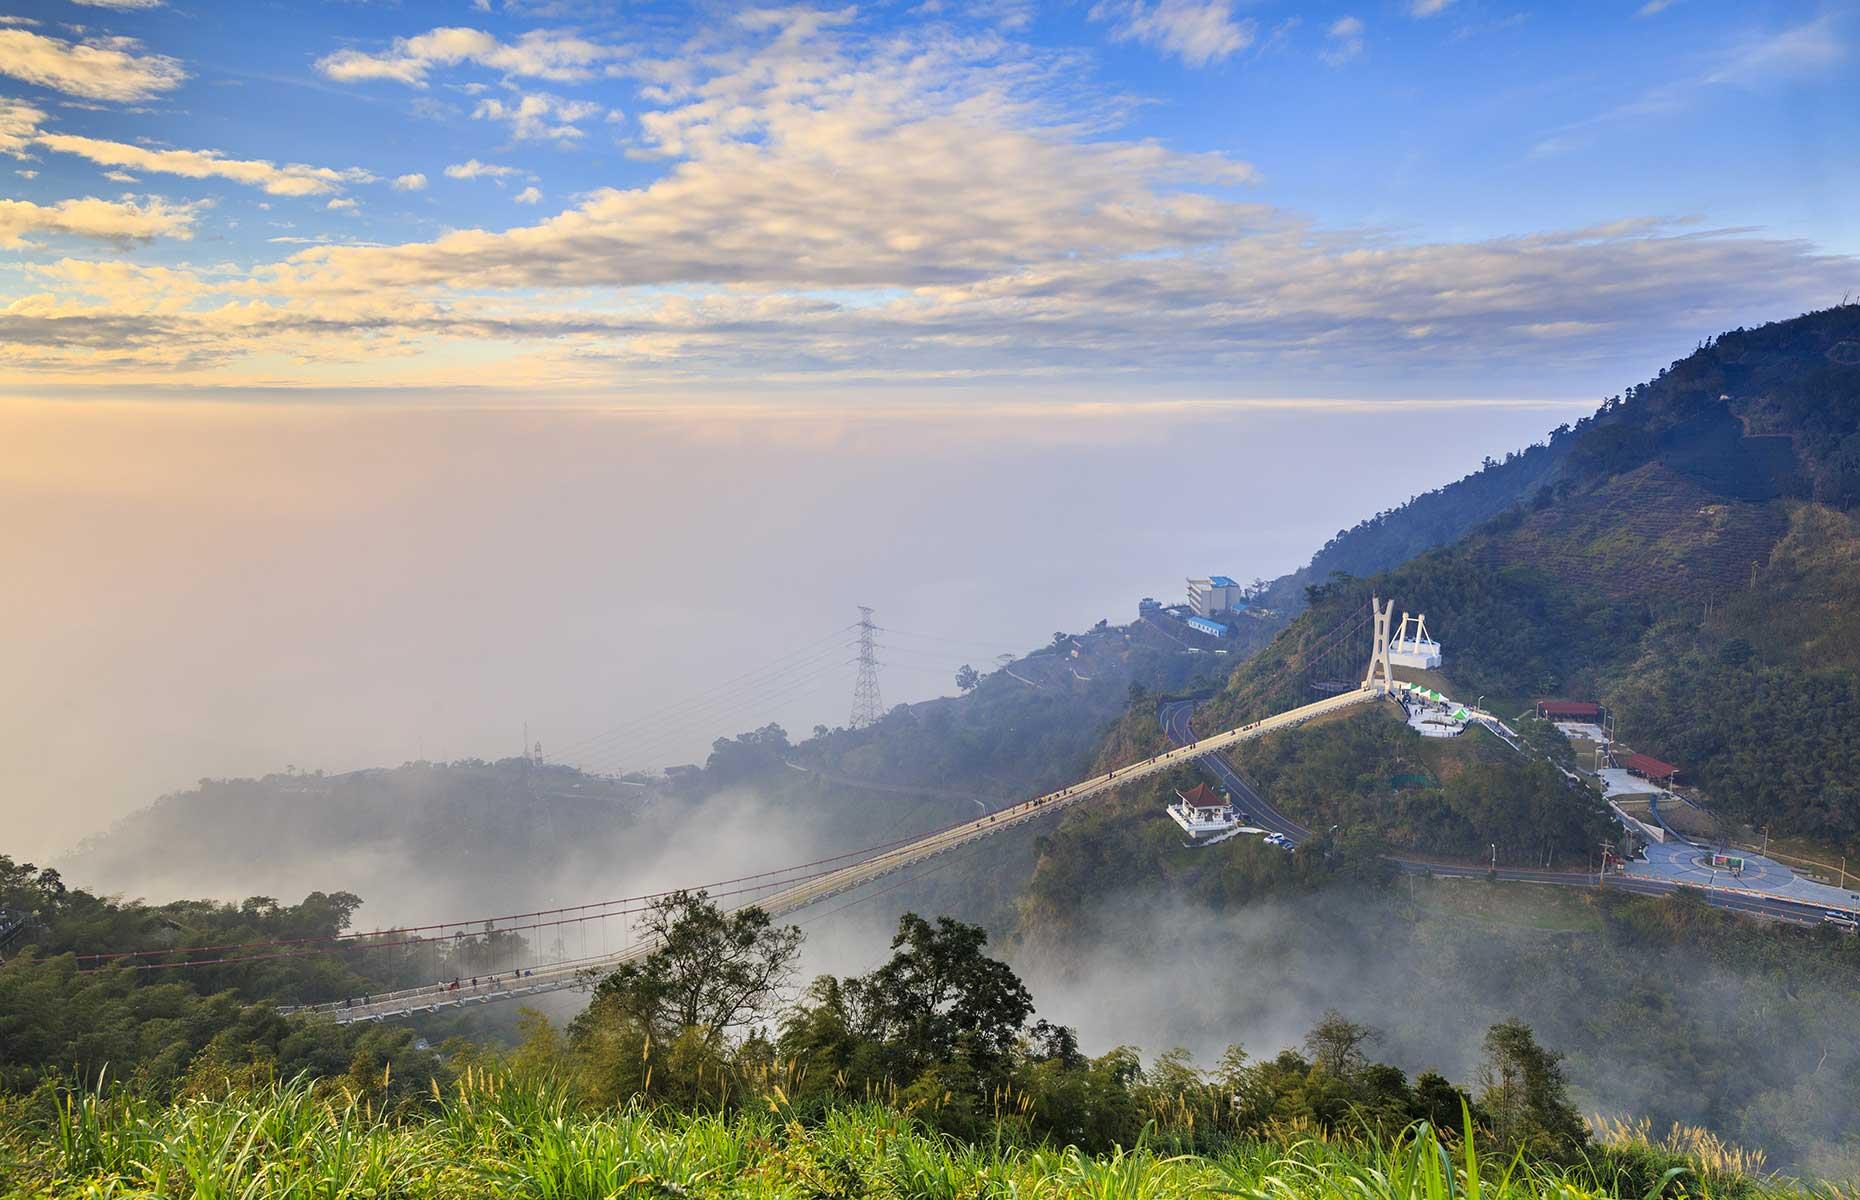 <p>Afraid of heights? Then steer clear of Taiping Suspension Bridge. At 3,281 feet (1,000m) above sea level, this is the highest scenic bridge in Taiwan, spanning 922 feet (281m) between Taipingshan and Guishan. As you take in one of the most scenic spots in Taiwan, enjoy the birds-eye views of the Chiayi-Tainan Plain and the Taiwan Strait, as well as the iconic 36 hairpin road bends of Meishan. The best time to visit is in the evenings (6-10pm) when the bridge lights up a different color each day of the week. </p>